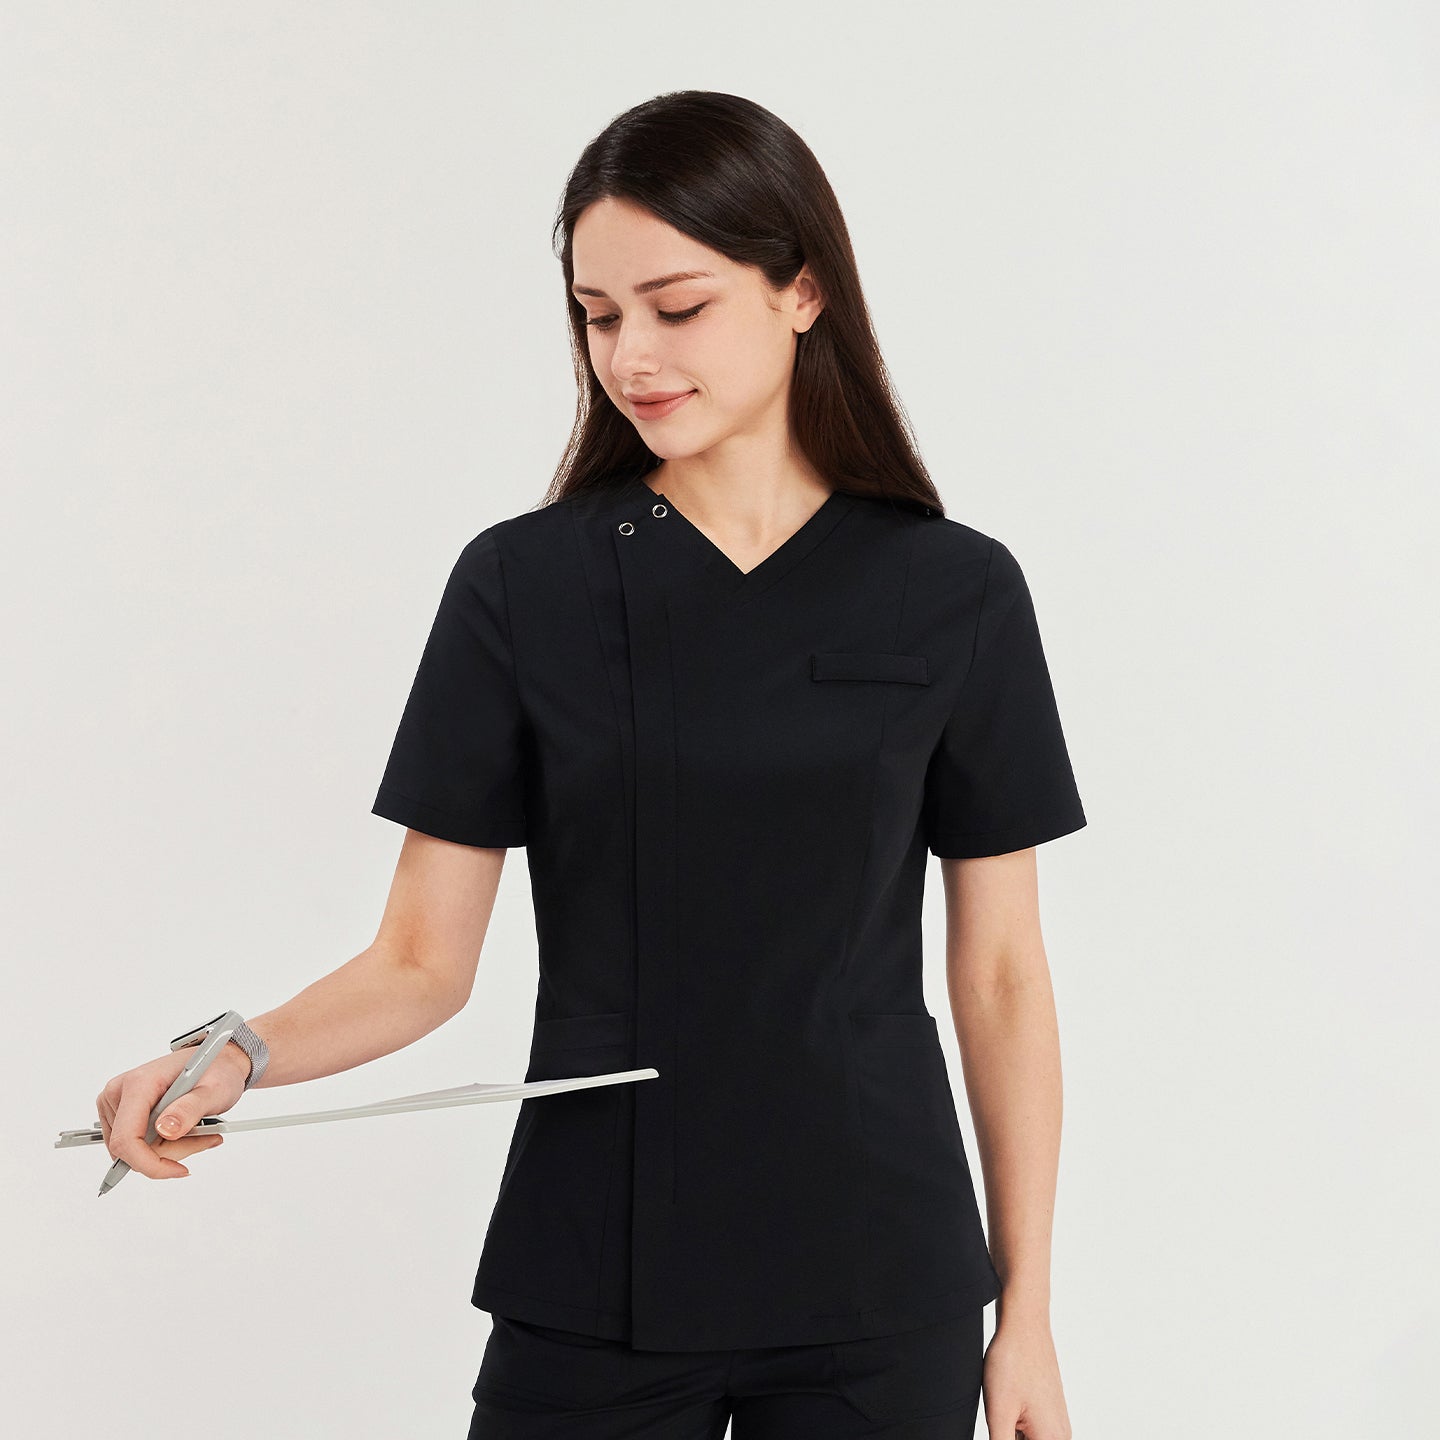 Woman in a black front zipper scrub top with patch pockets and matching straight-leg pants, holding a clipboard, looking down,Black